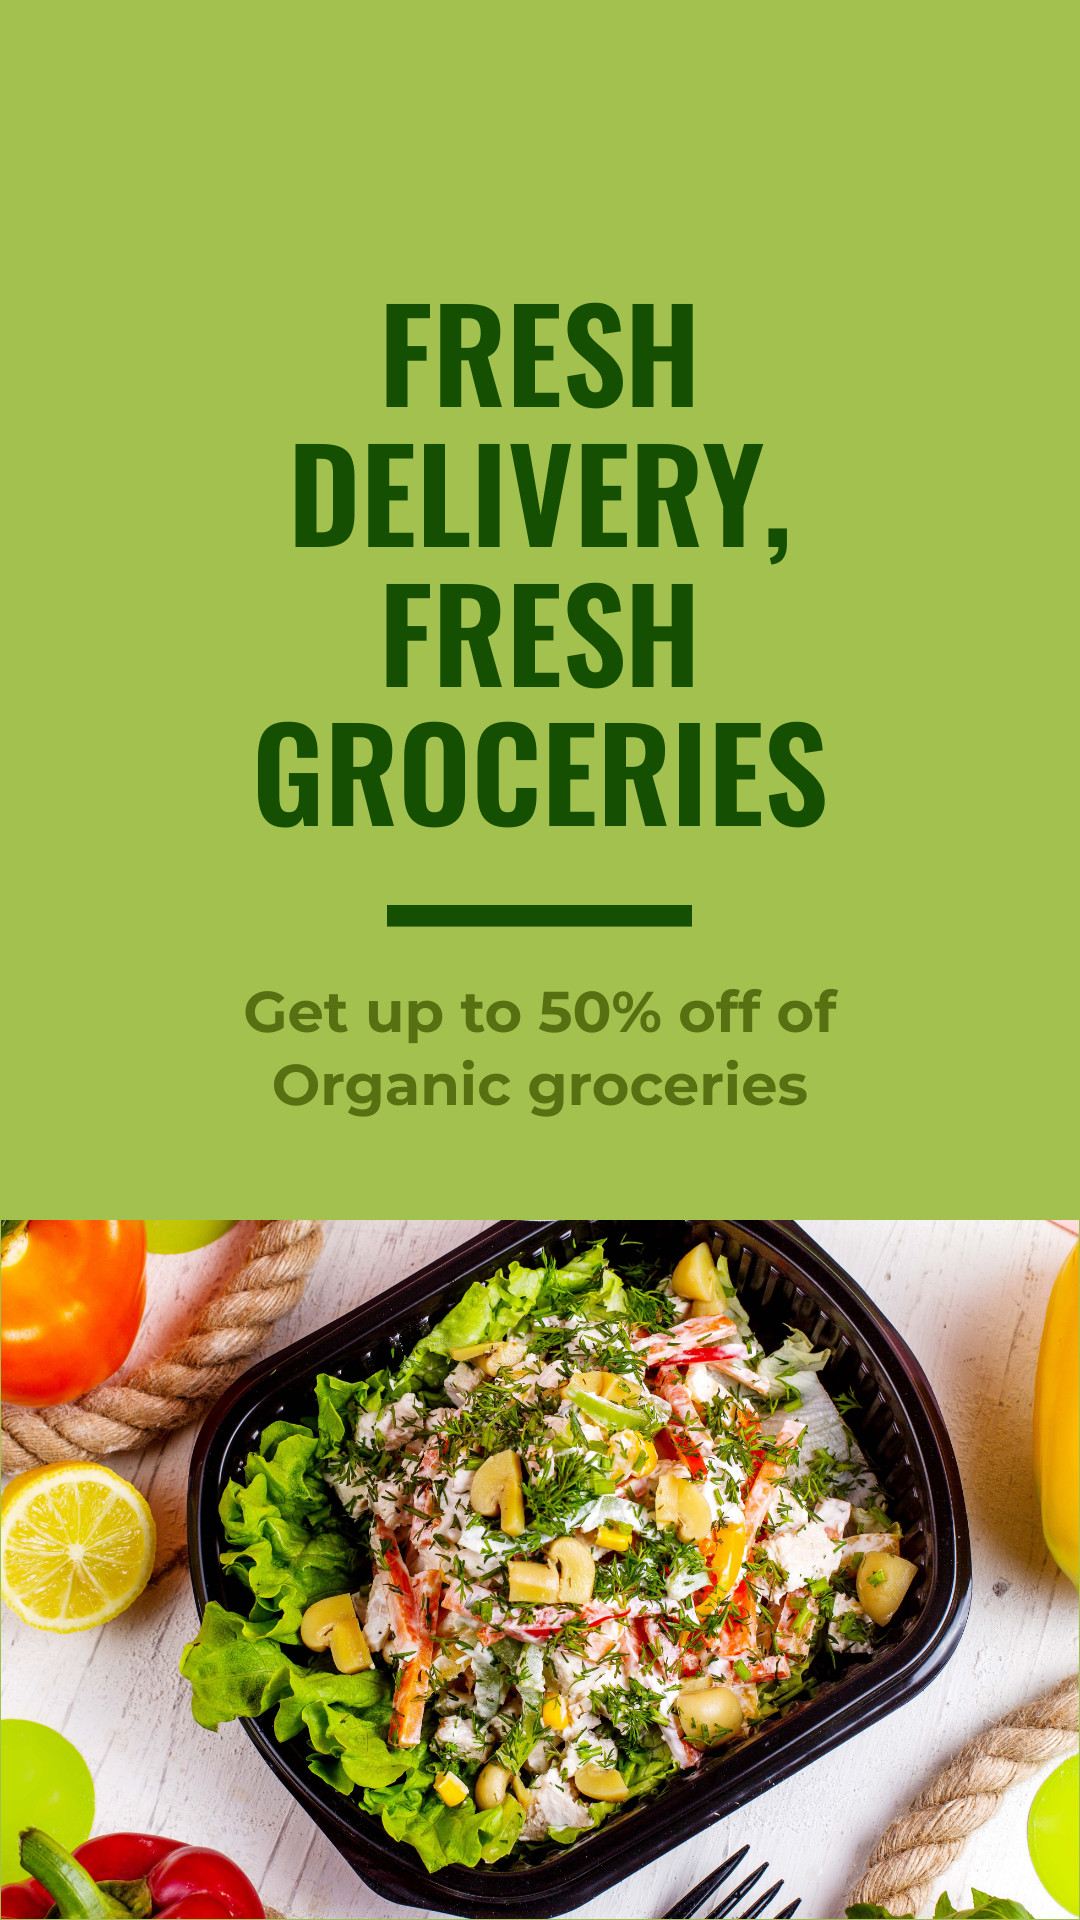 Fresh Delivery Fresh Groceries Inline Rectangle 300x250